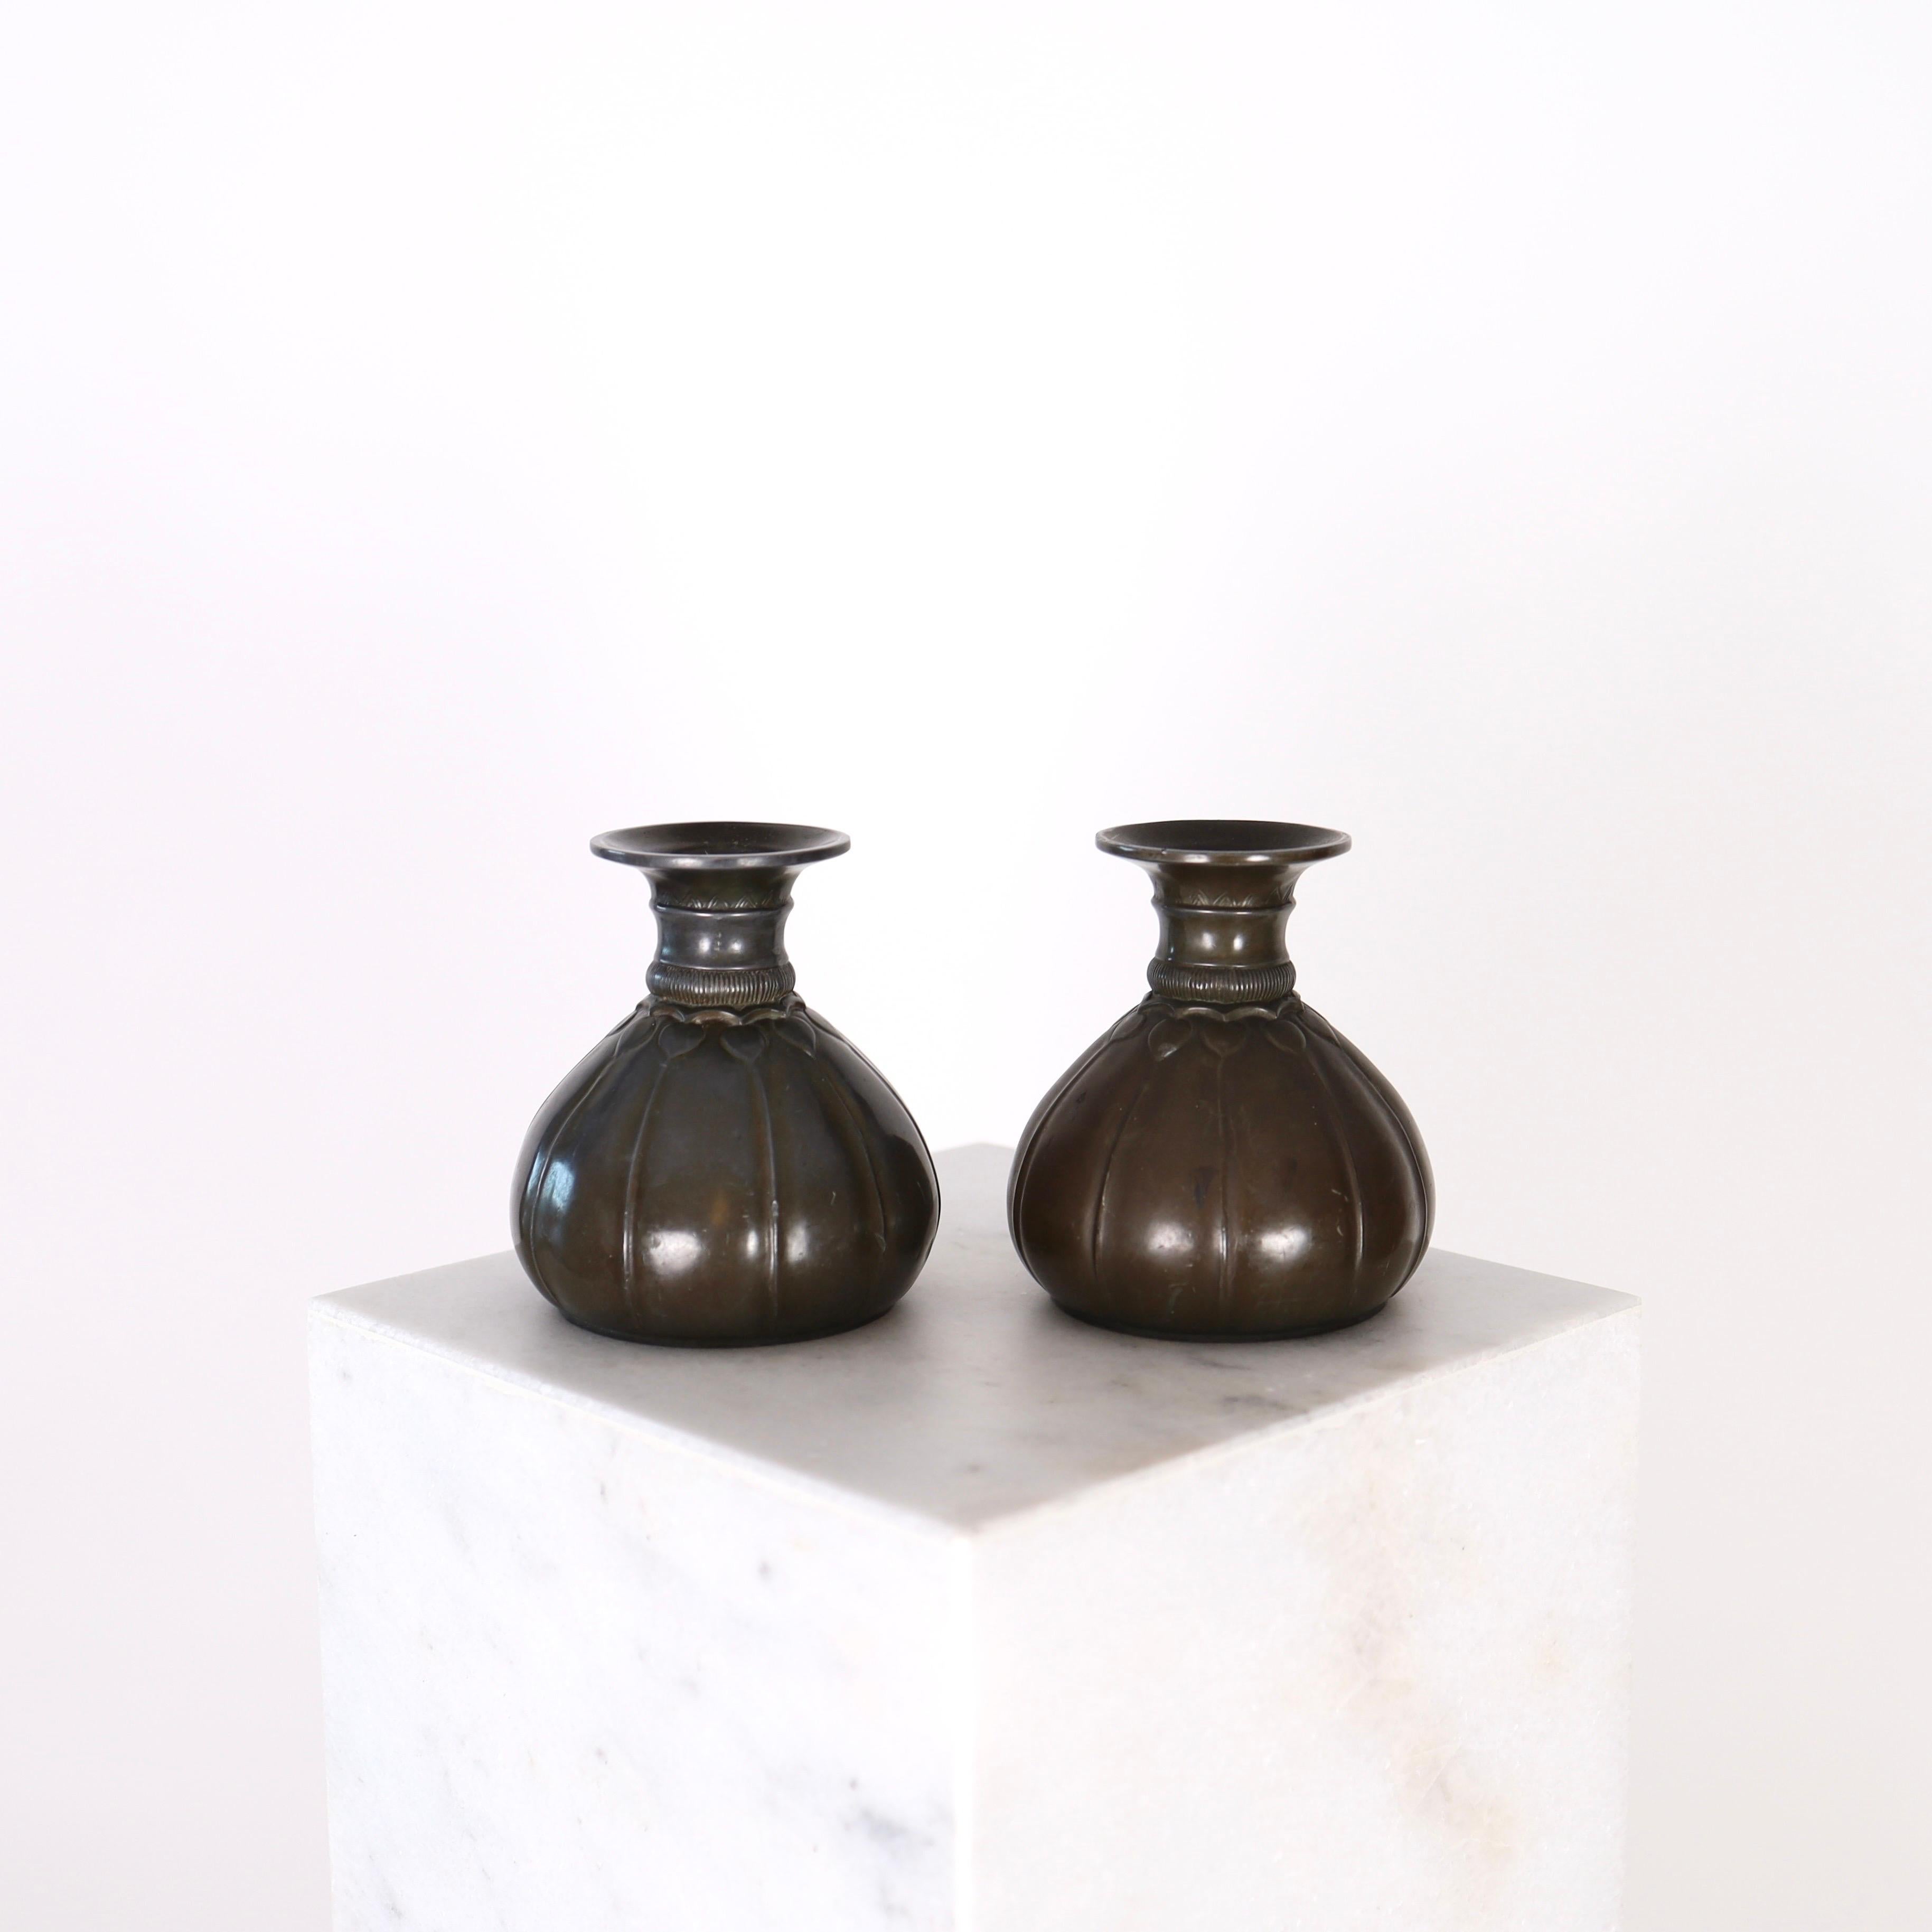 A rare set of metal vases designed by Just Andersen in 1920s. The set is early-work by Just Andersen and a true testament to the Danish design heritage.
 
* A pair of metal vases 
* Designer: Just Andersen
* Style: D88 (stamped 'Just D88')
* Year: